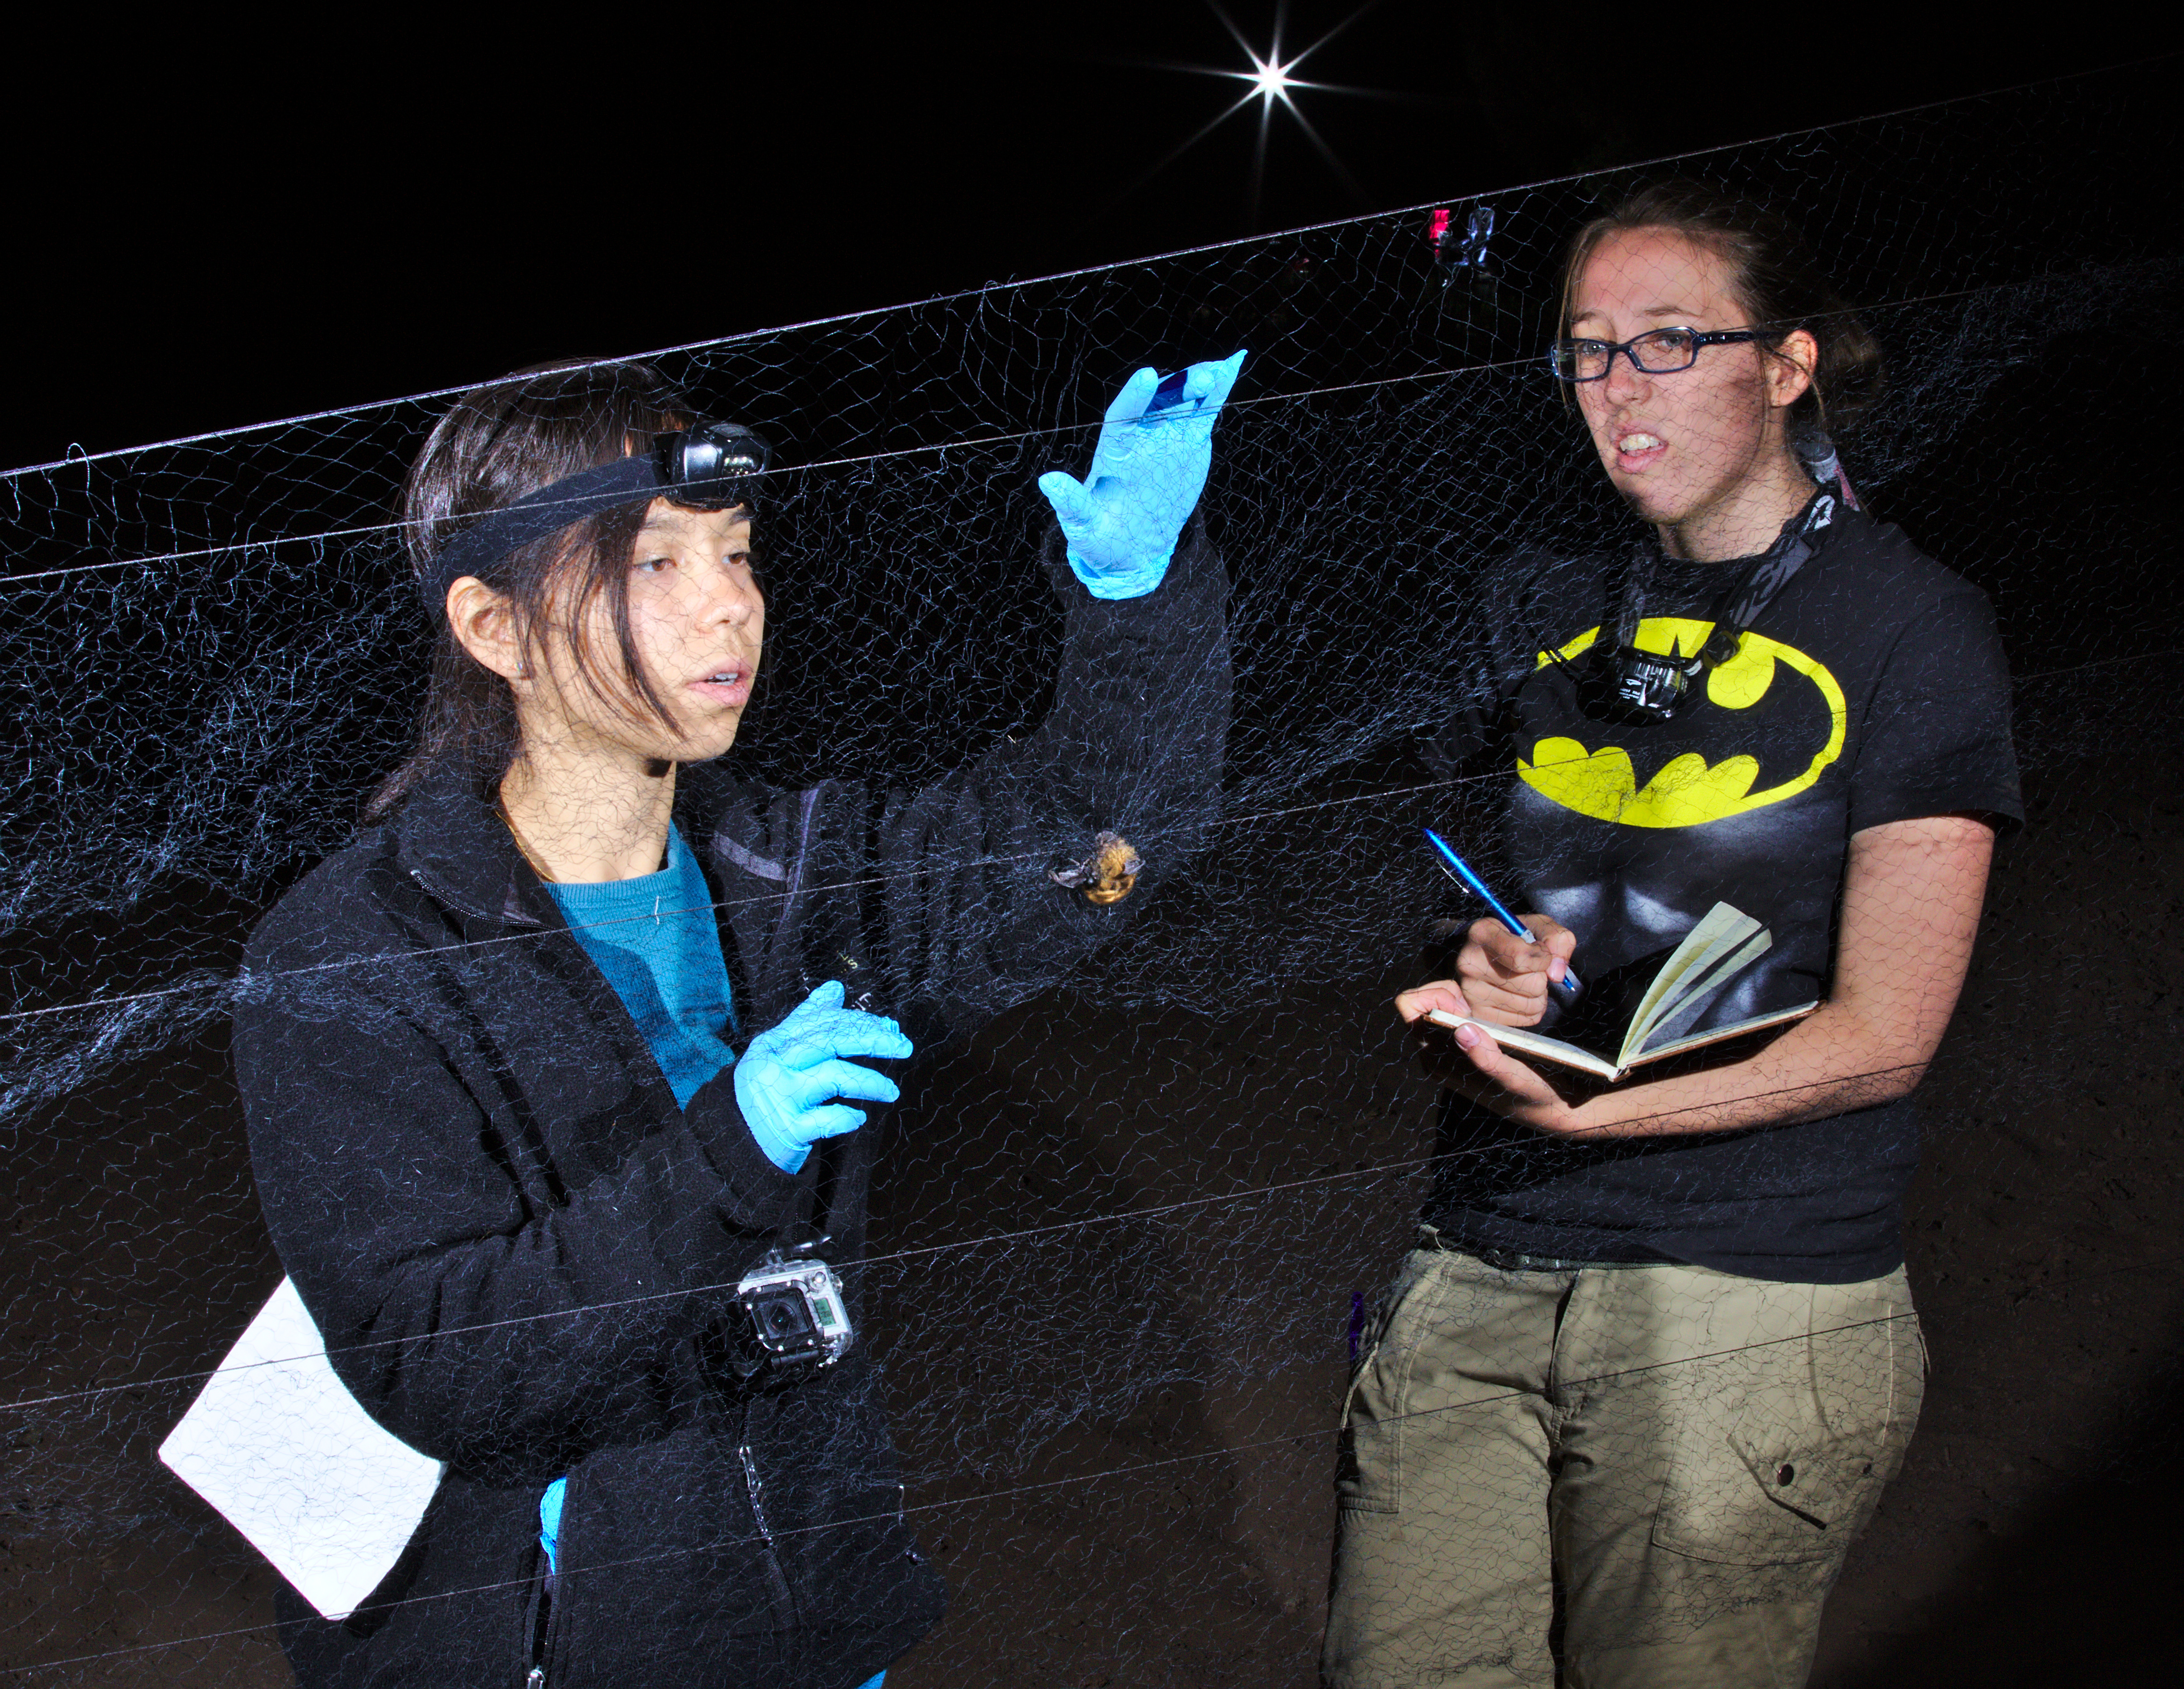 Roxy removing a bat from the net while Laura records data